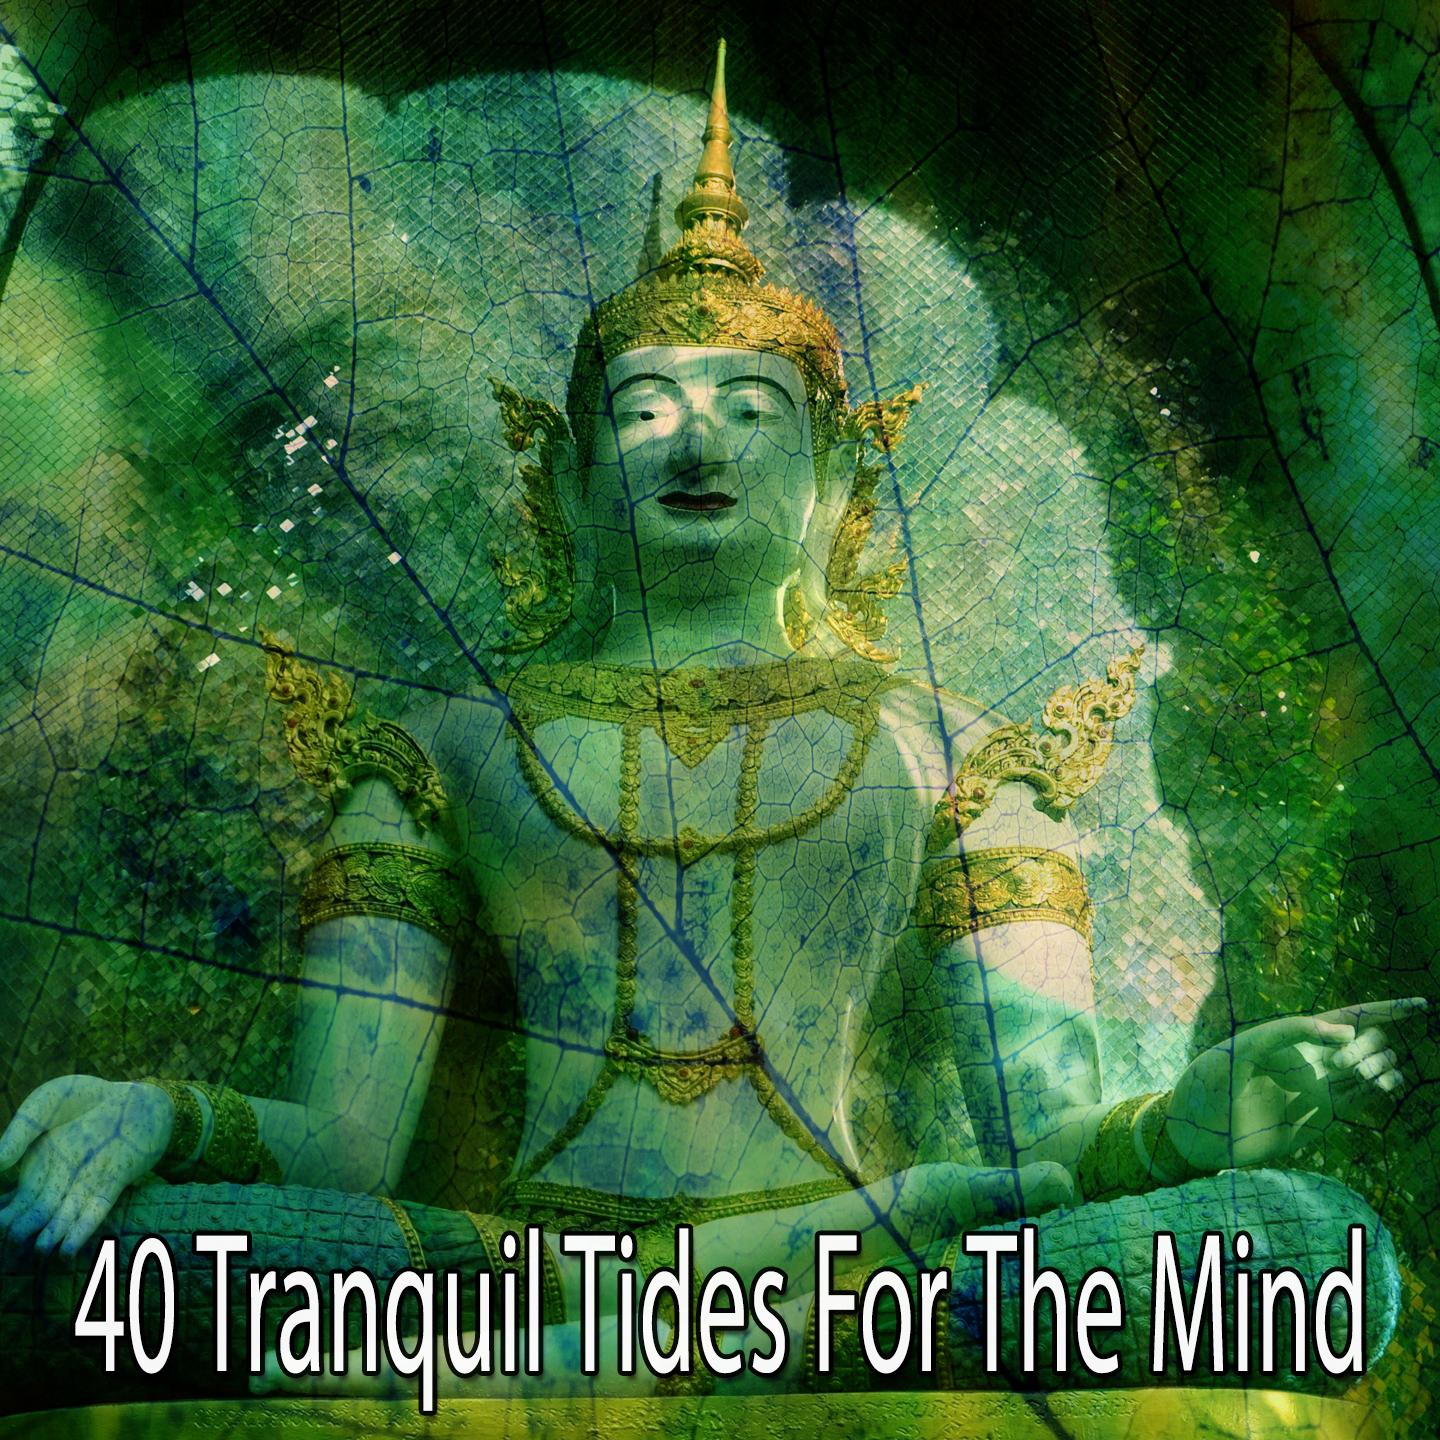 40 Tranquil Tides for the Mind